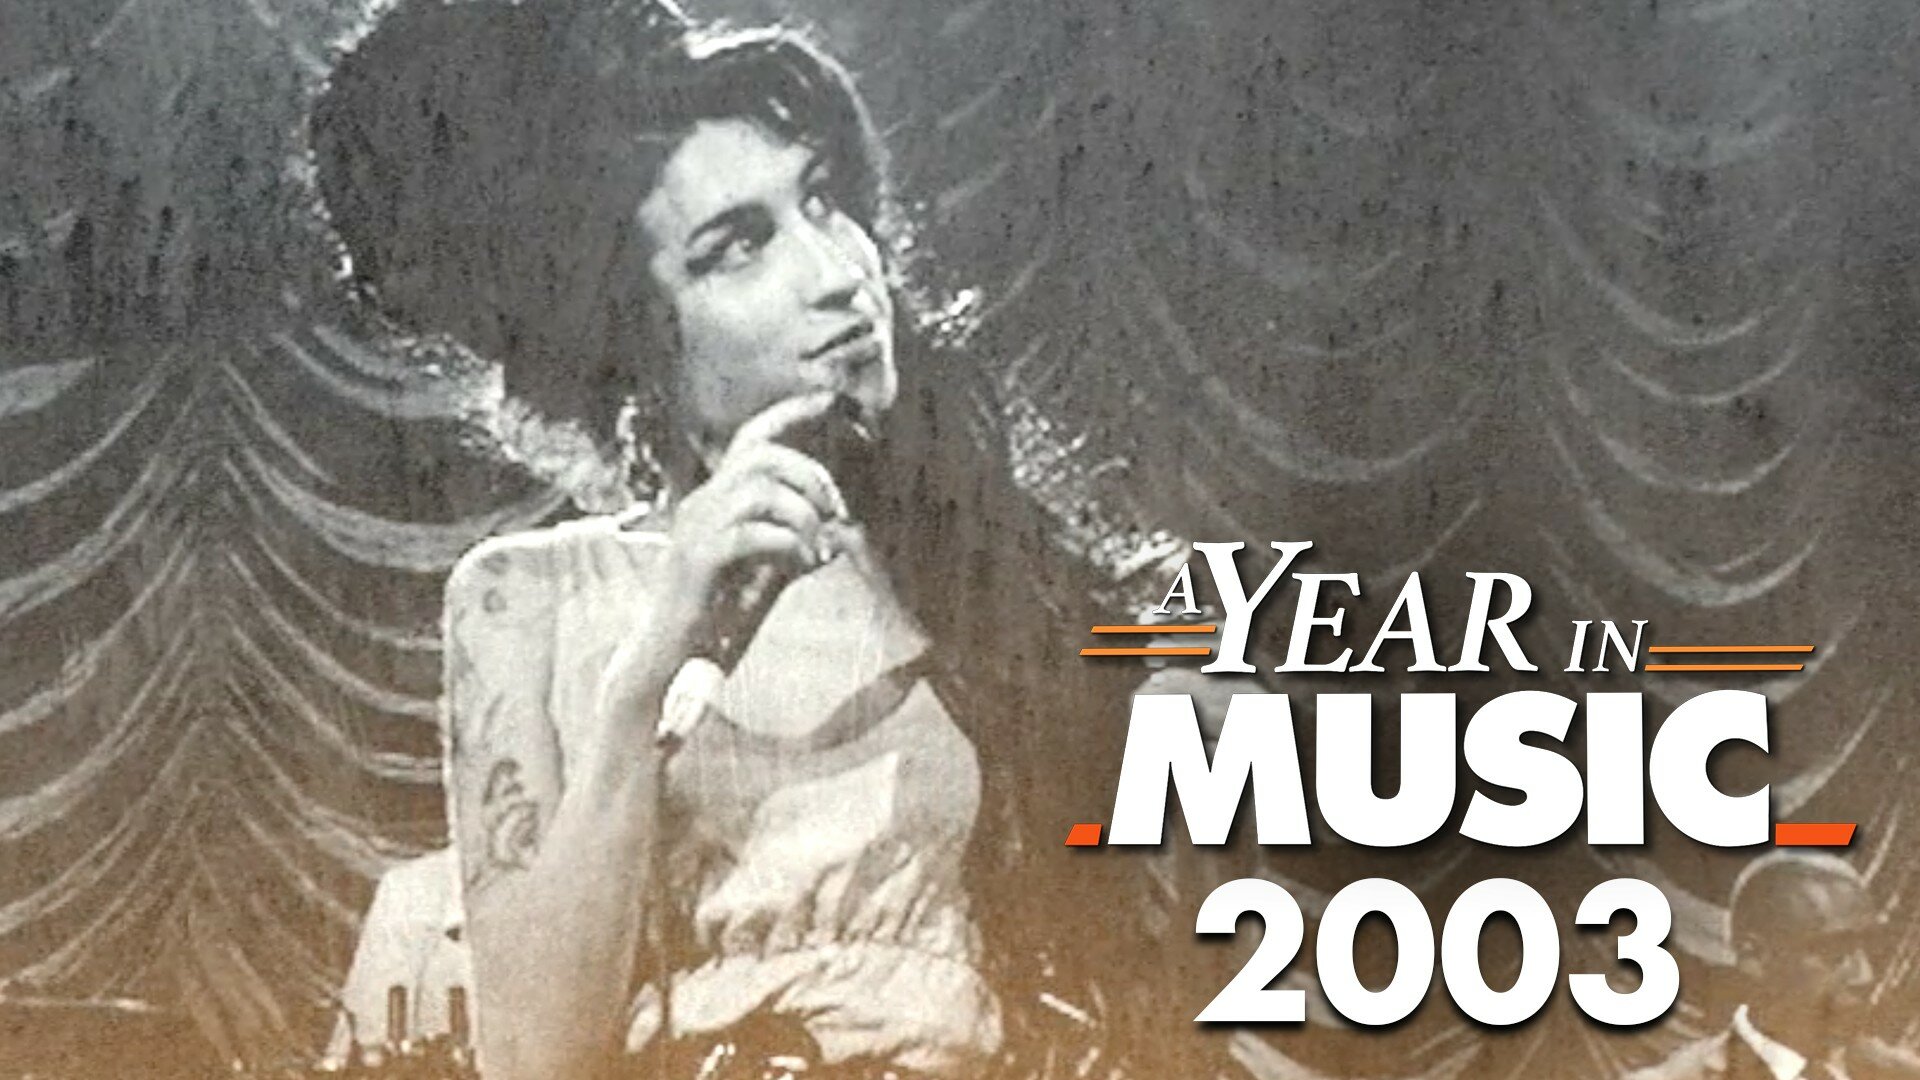 A Year in Music S3E11 2003